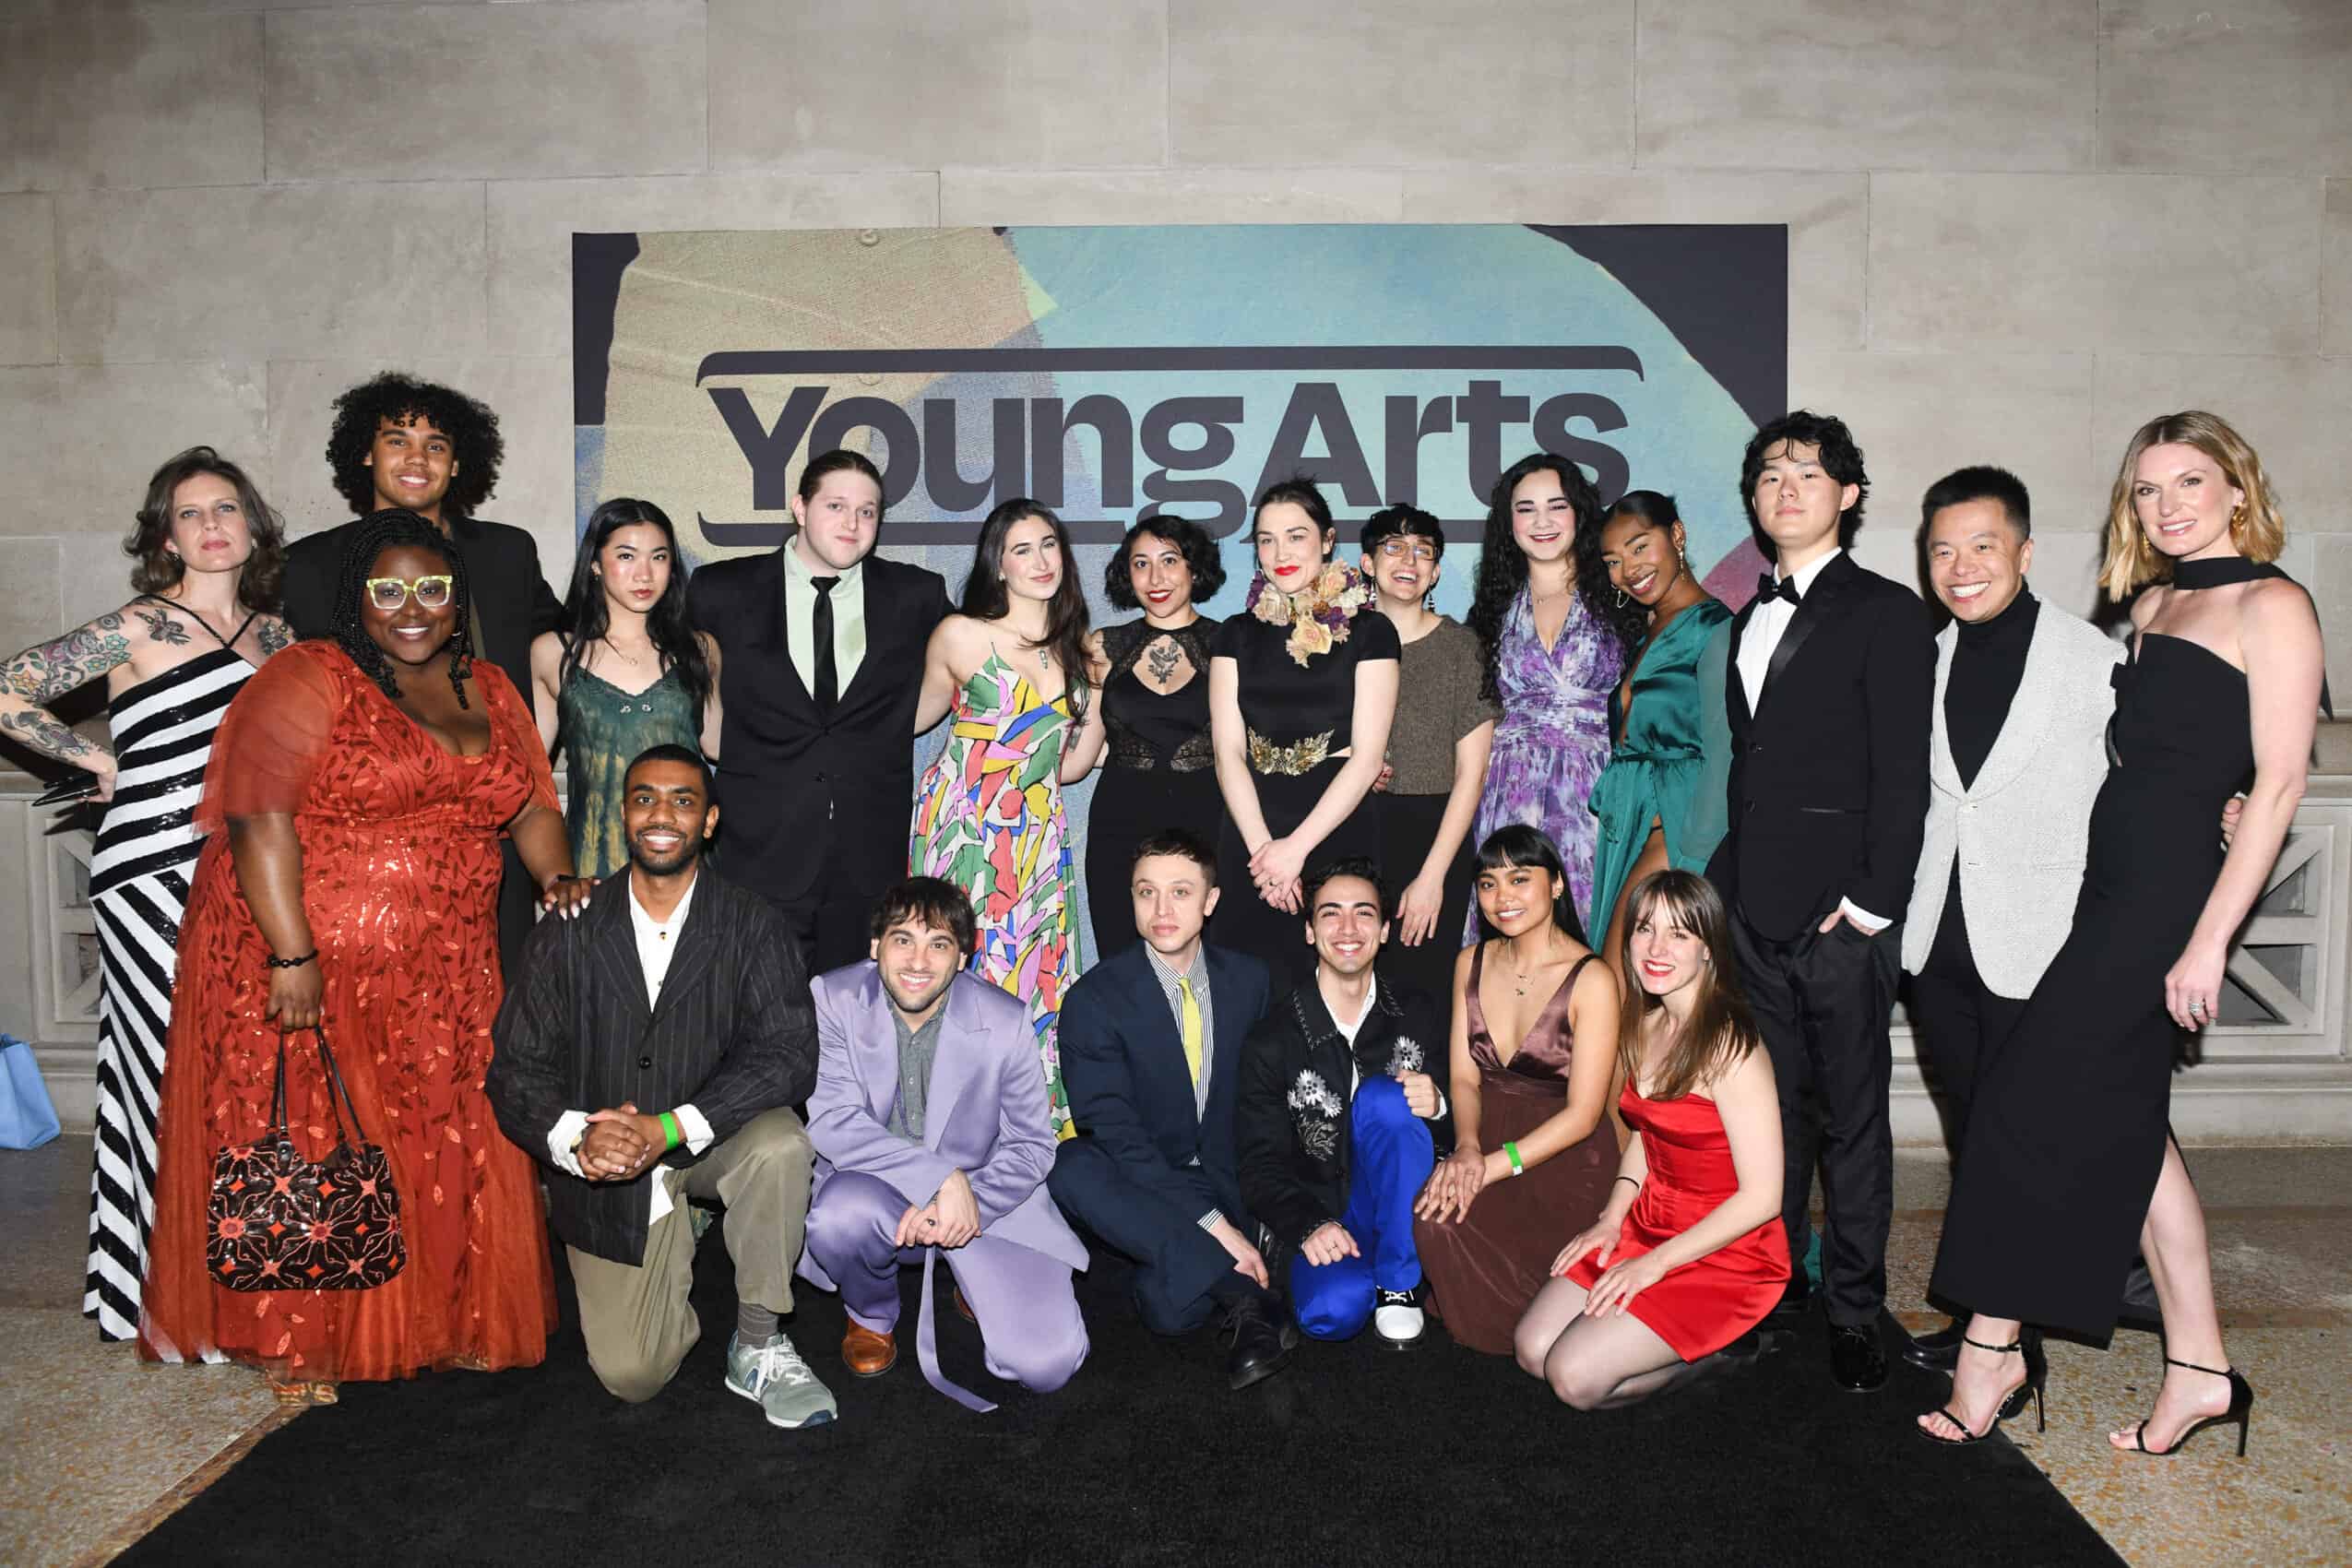 YOUNGARTS Gala Raises Nearly $1Million for Artists